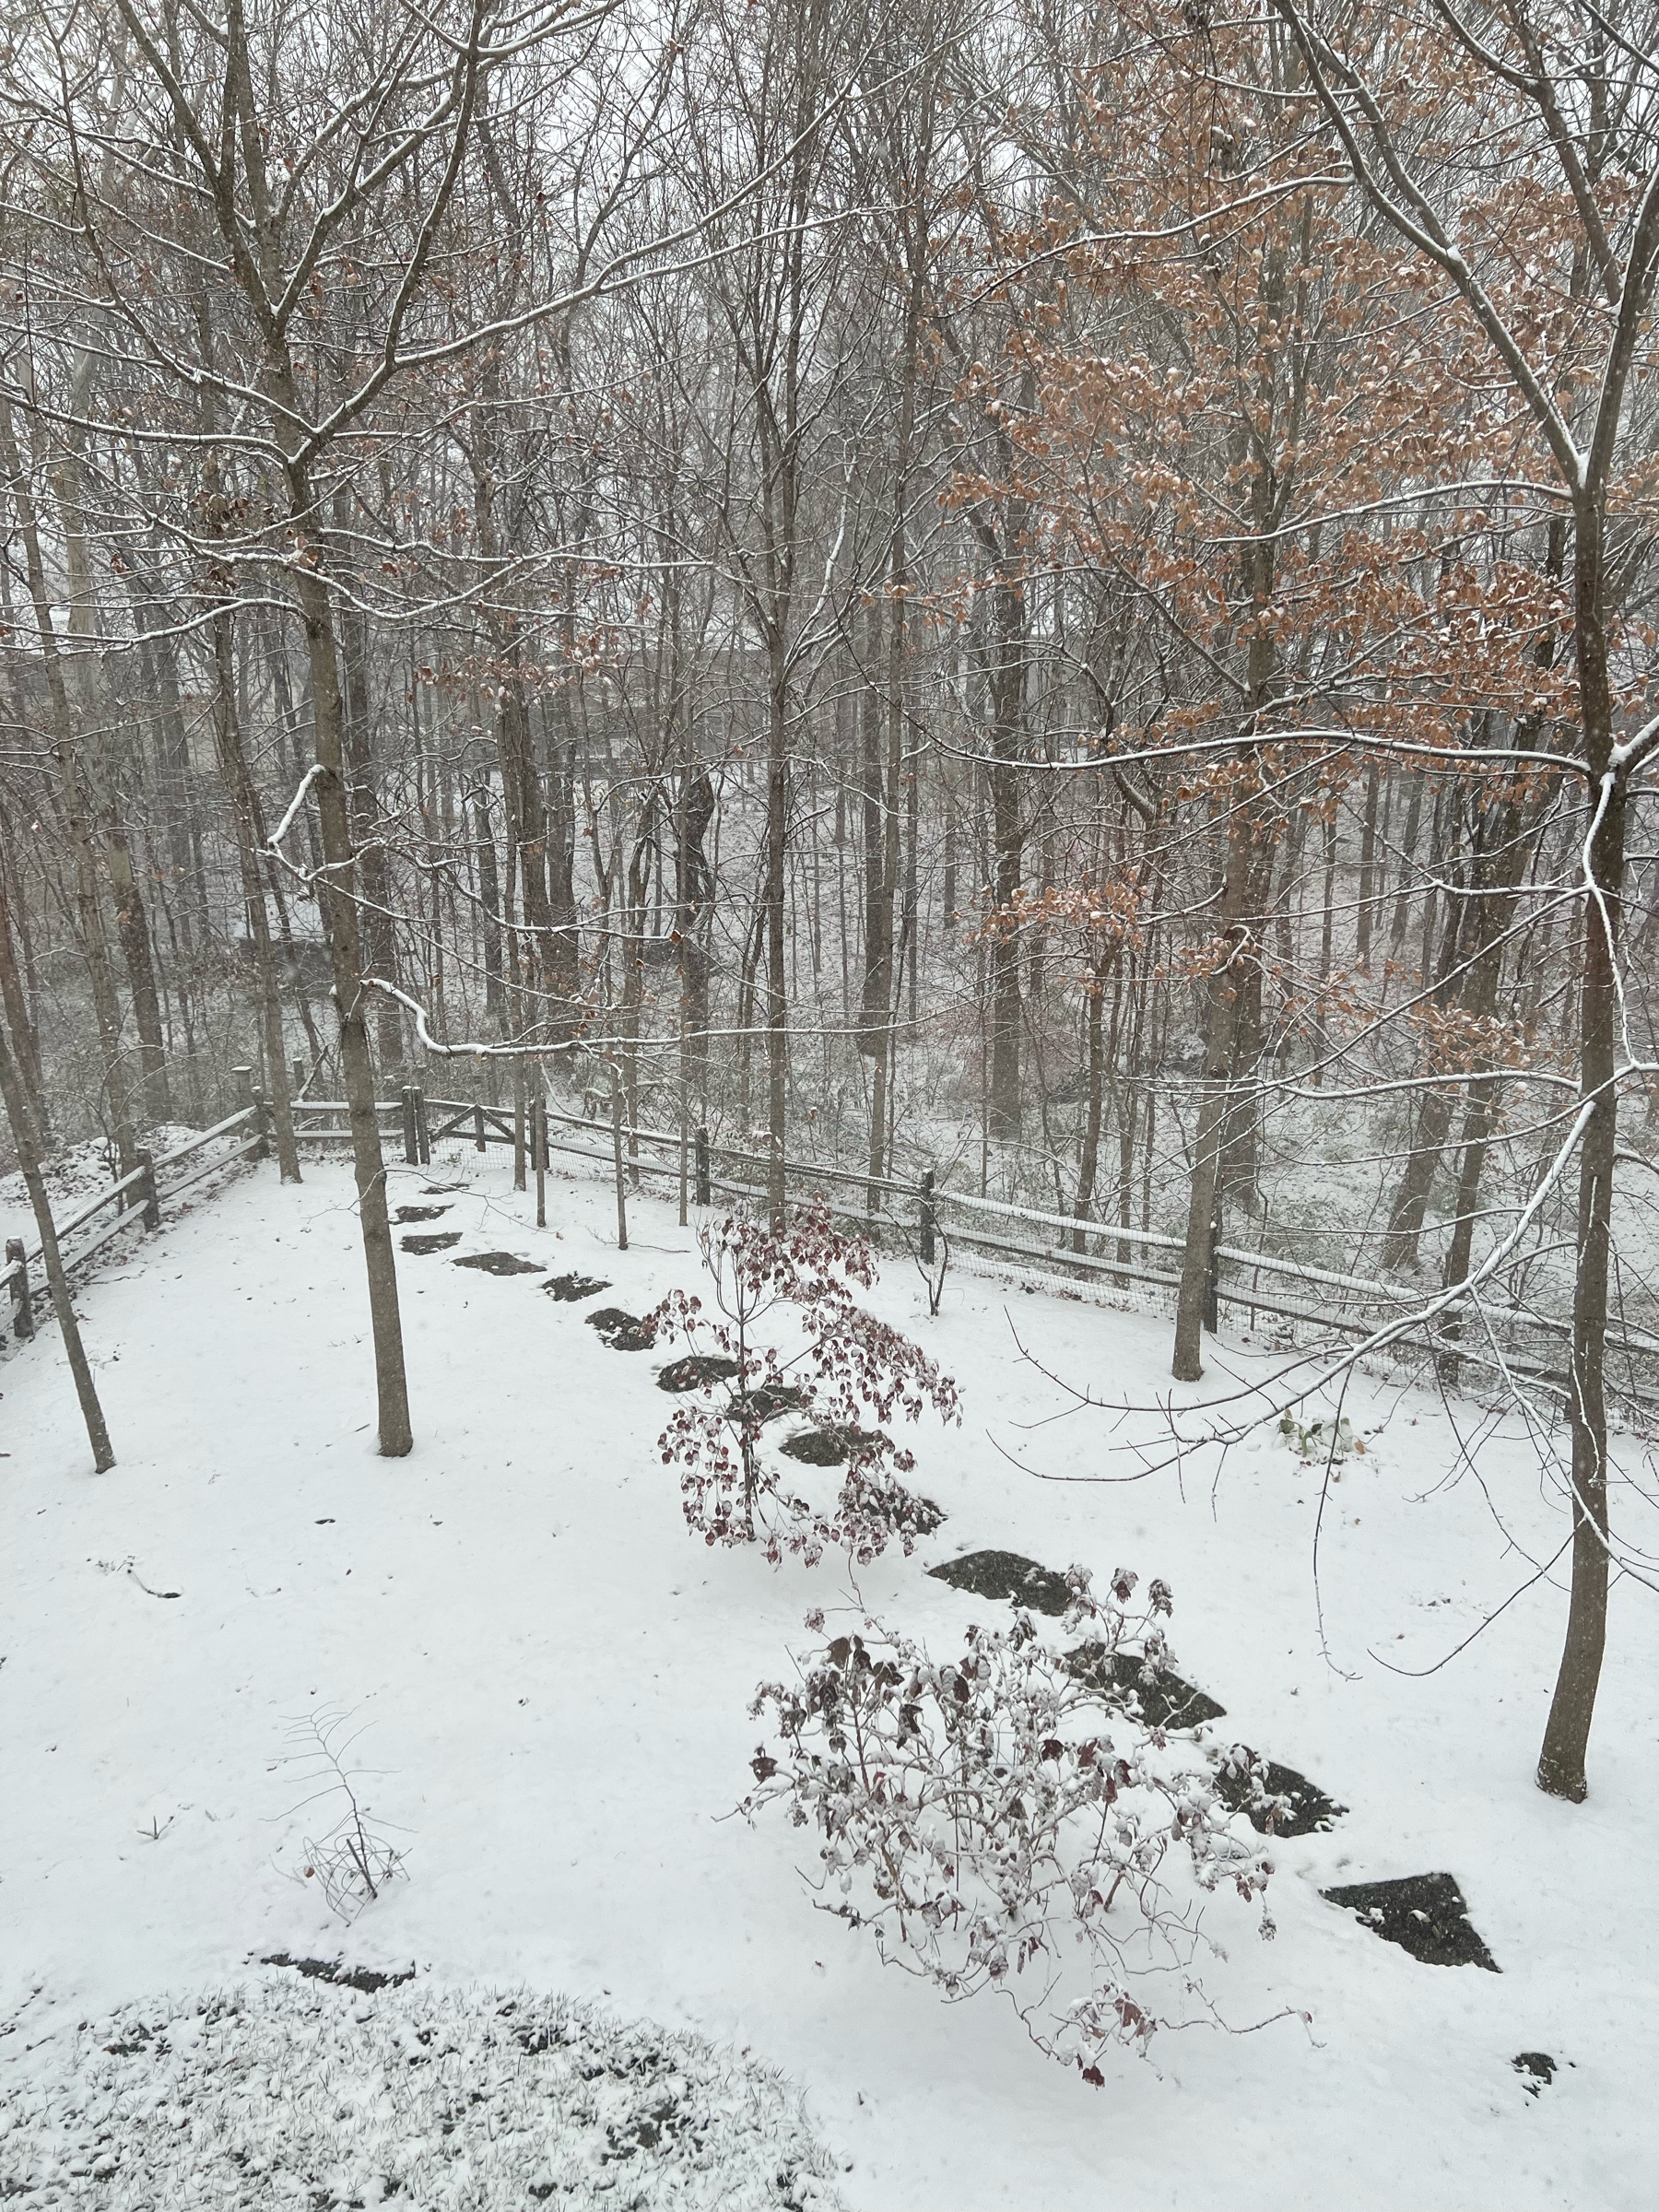 Our wooded backyard covered in a tracking snow.